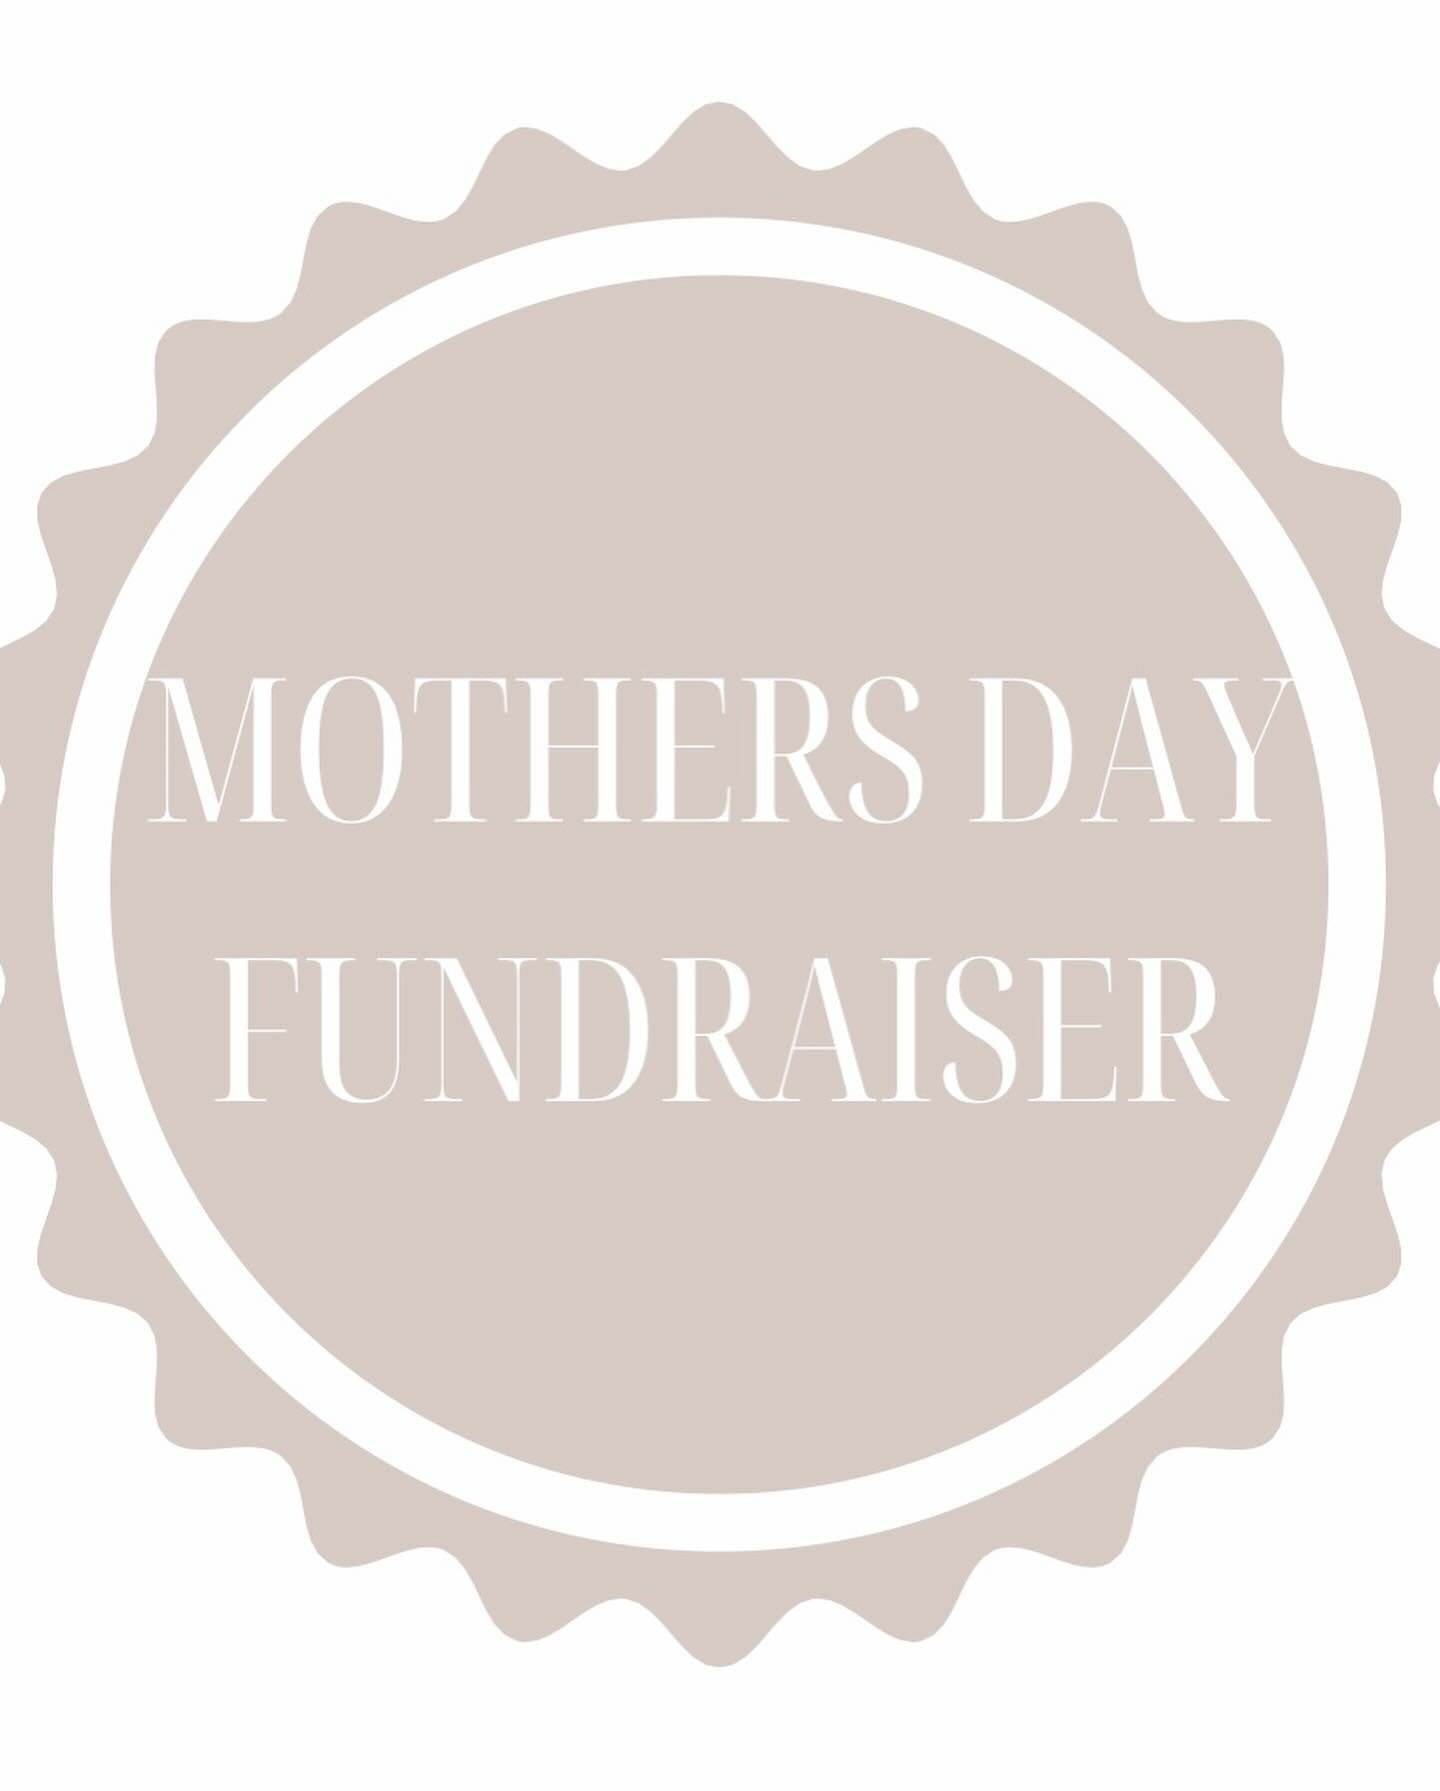 To celebrate Mother&rsquo;s Day this year our Mountainbloomed community is holding a raffle, with all funds going straight to the Young Living Foundation.

As a team we have donated prizes to the value of over $2000, we will be selling tickets for $5